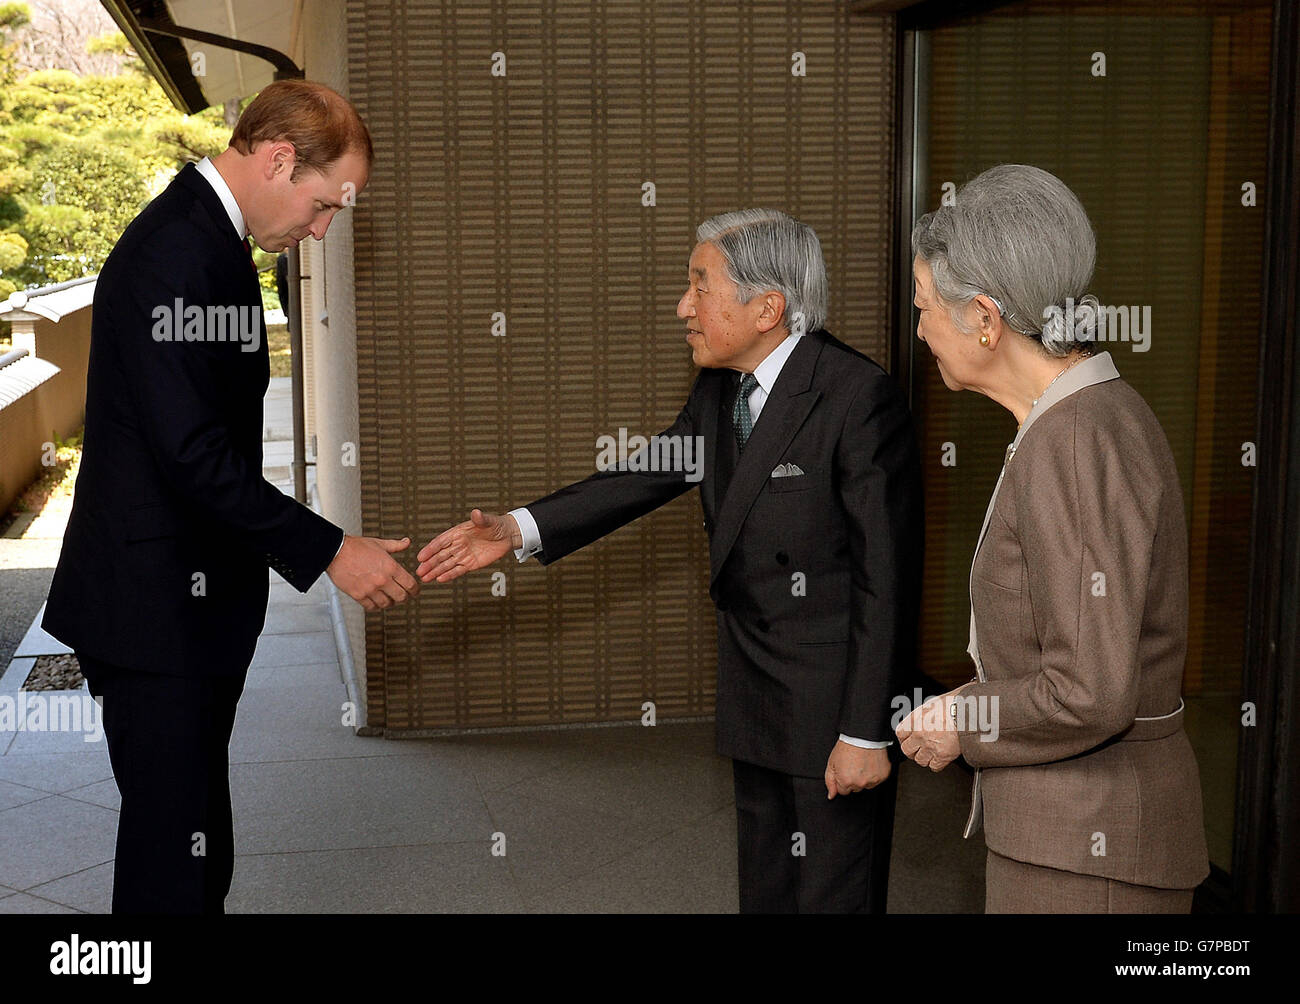 The Duke of Cambridge shakes hands with Emperor Akihito watched by Empress Michiko, after he arrived for lunch at the couple's residence within the Royal Palace grounds in central Tokyo, during the second day of his trip to Japan. Stock Photo